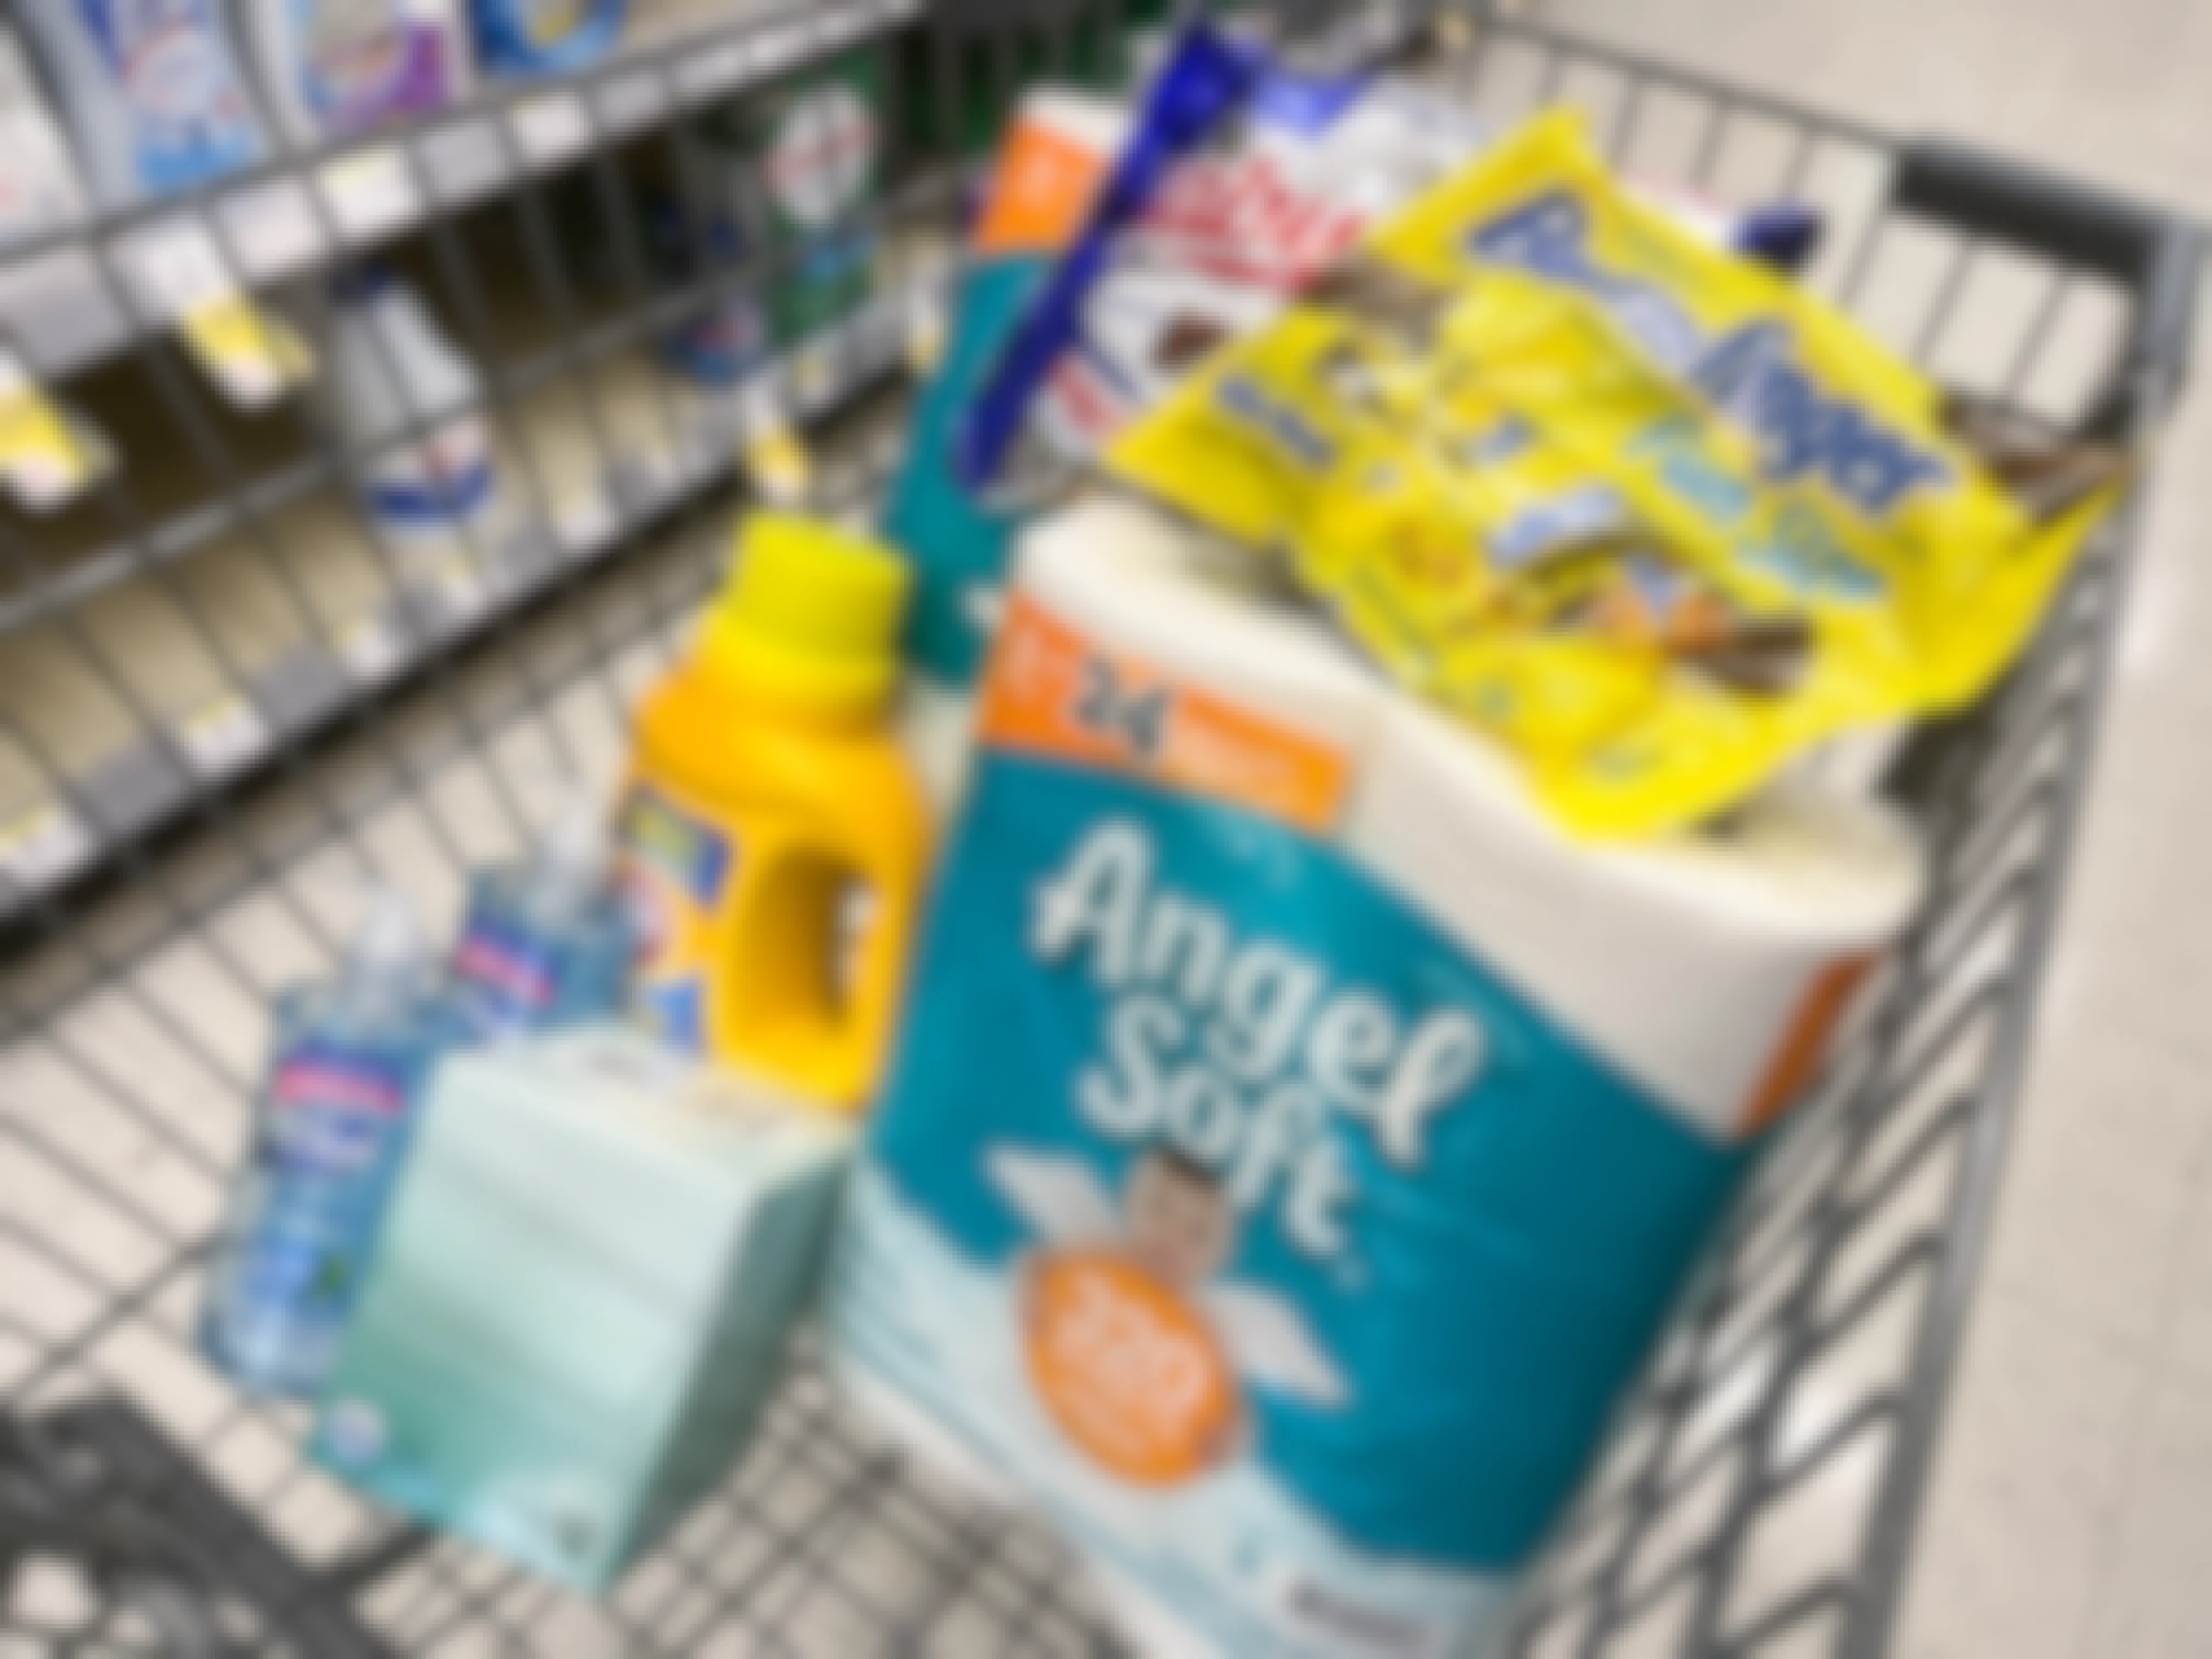 angled view of shopping cart with walgreens shopping haul